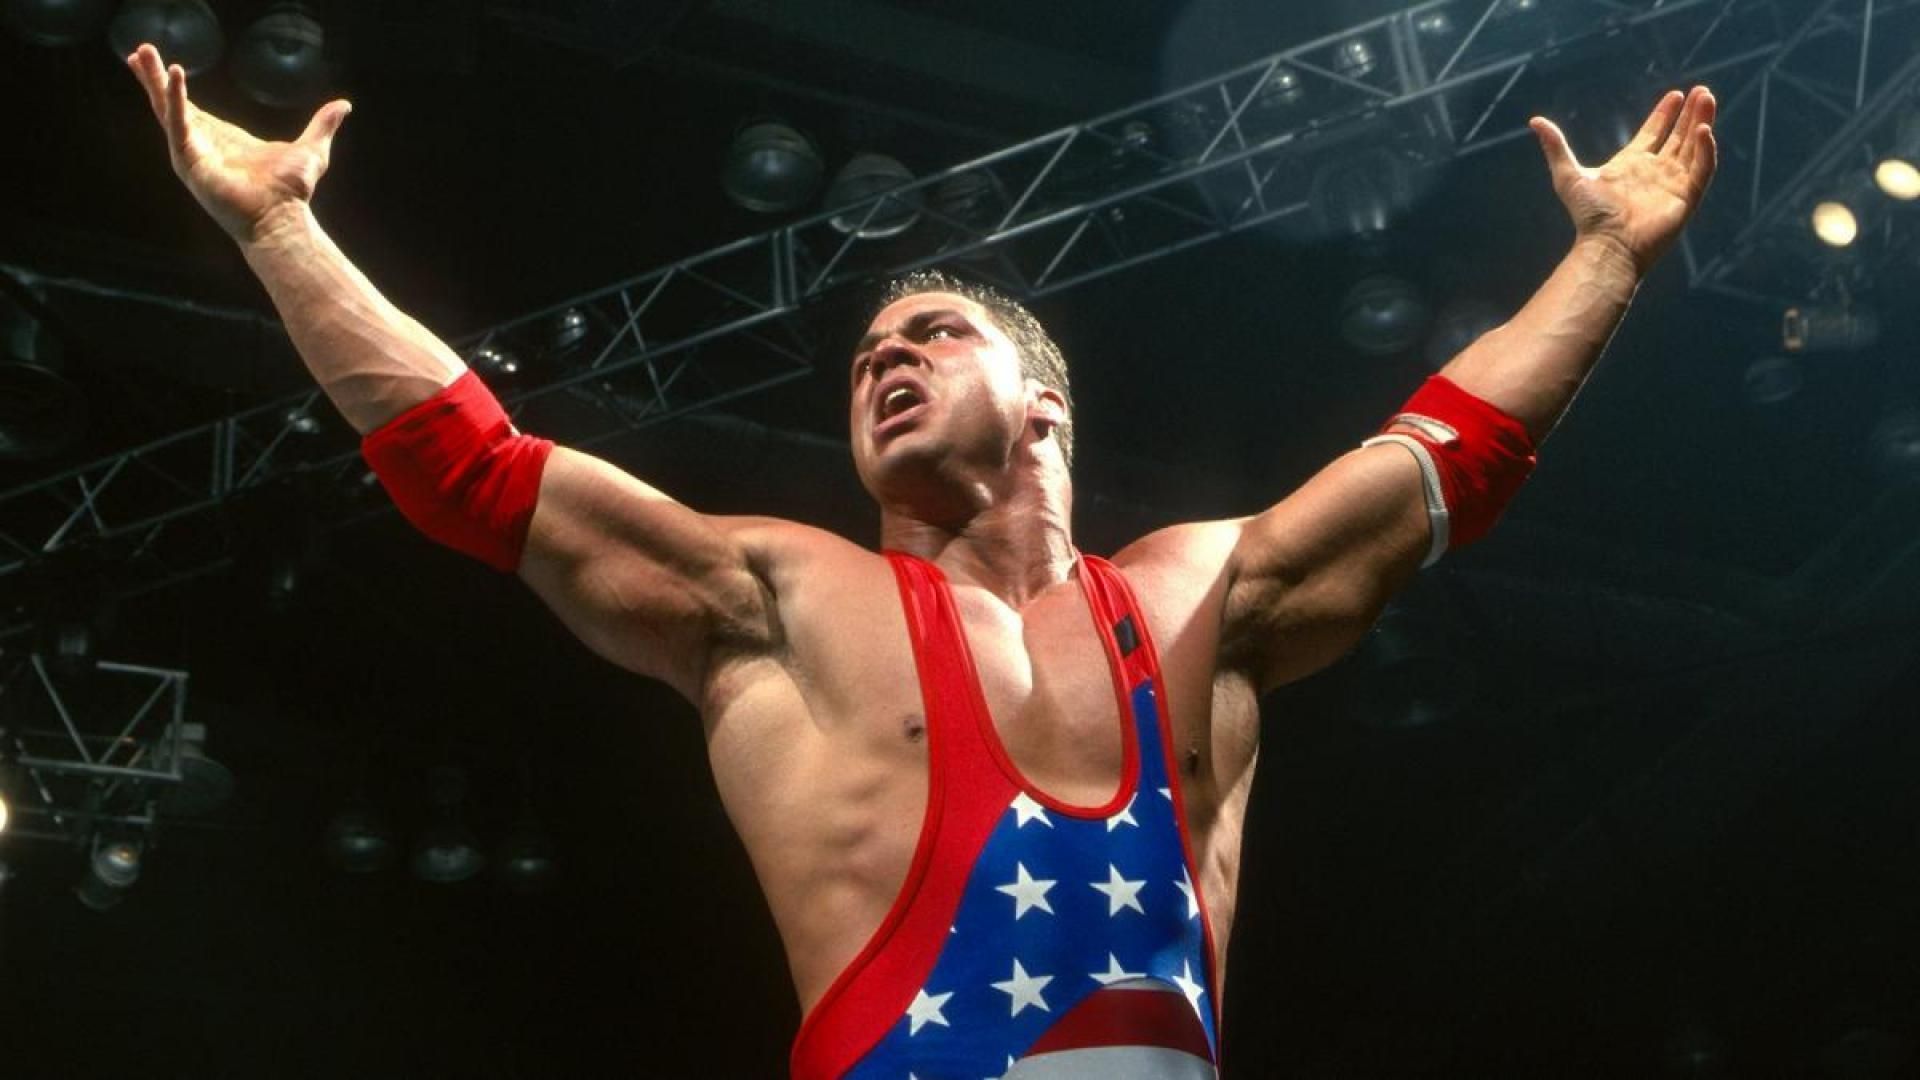 Kurt Angle is one of the greatest wrestlers of all time.